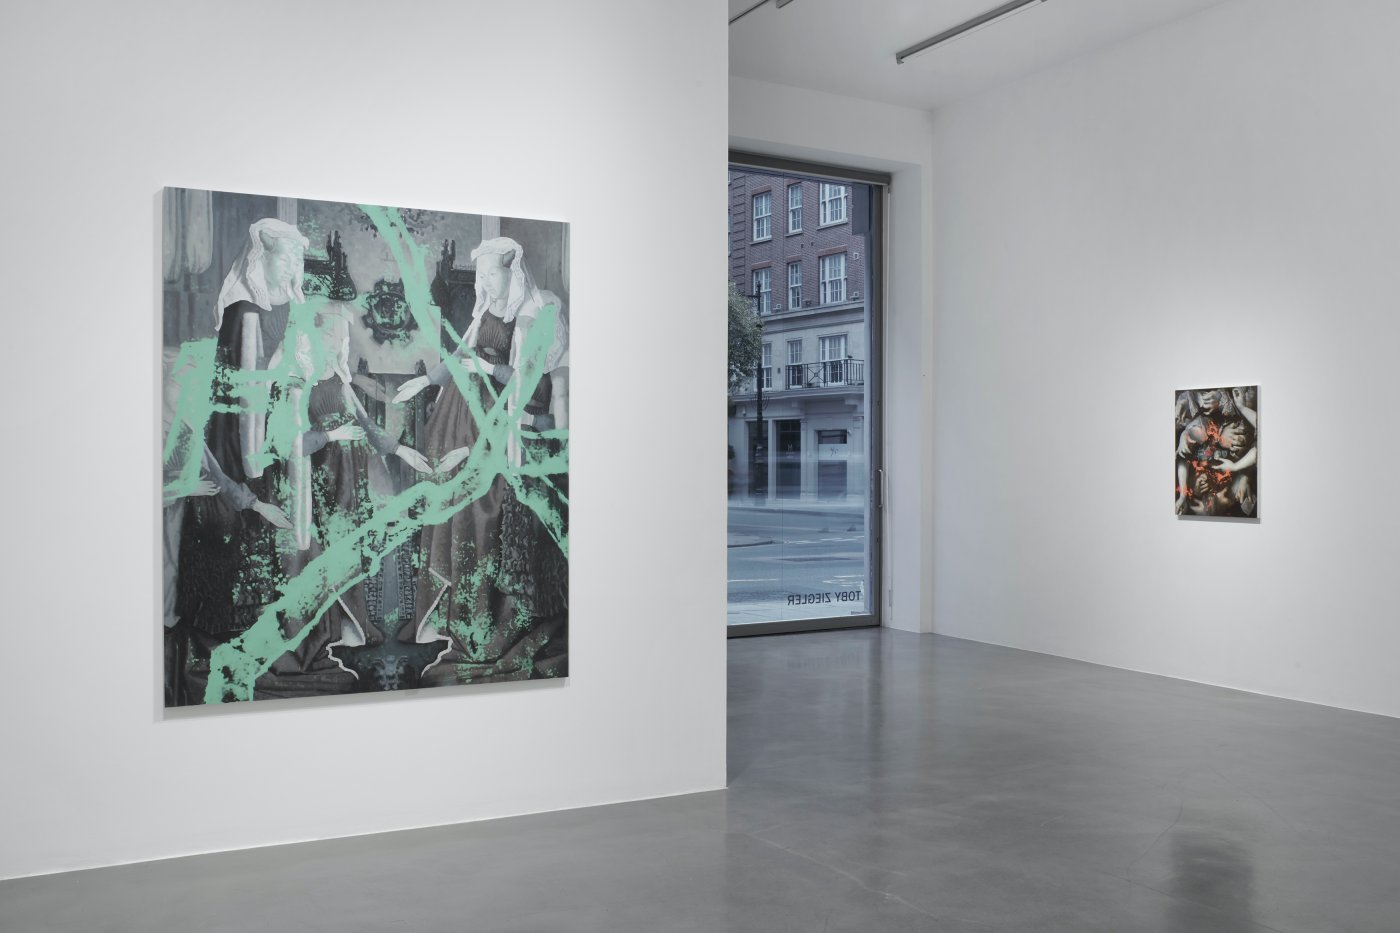 Installation image for Toby Ziegler: The sudden longing to collapse 30 years of distance, at Simon Lee Gallery